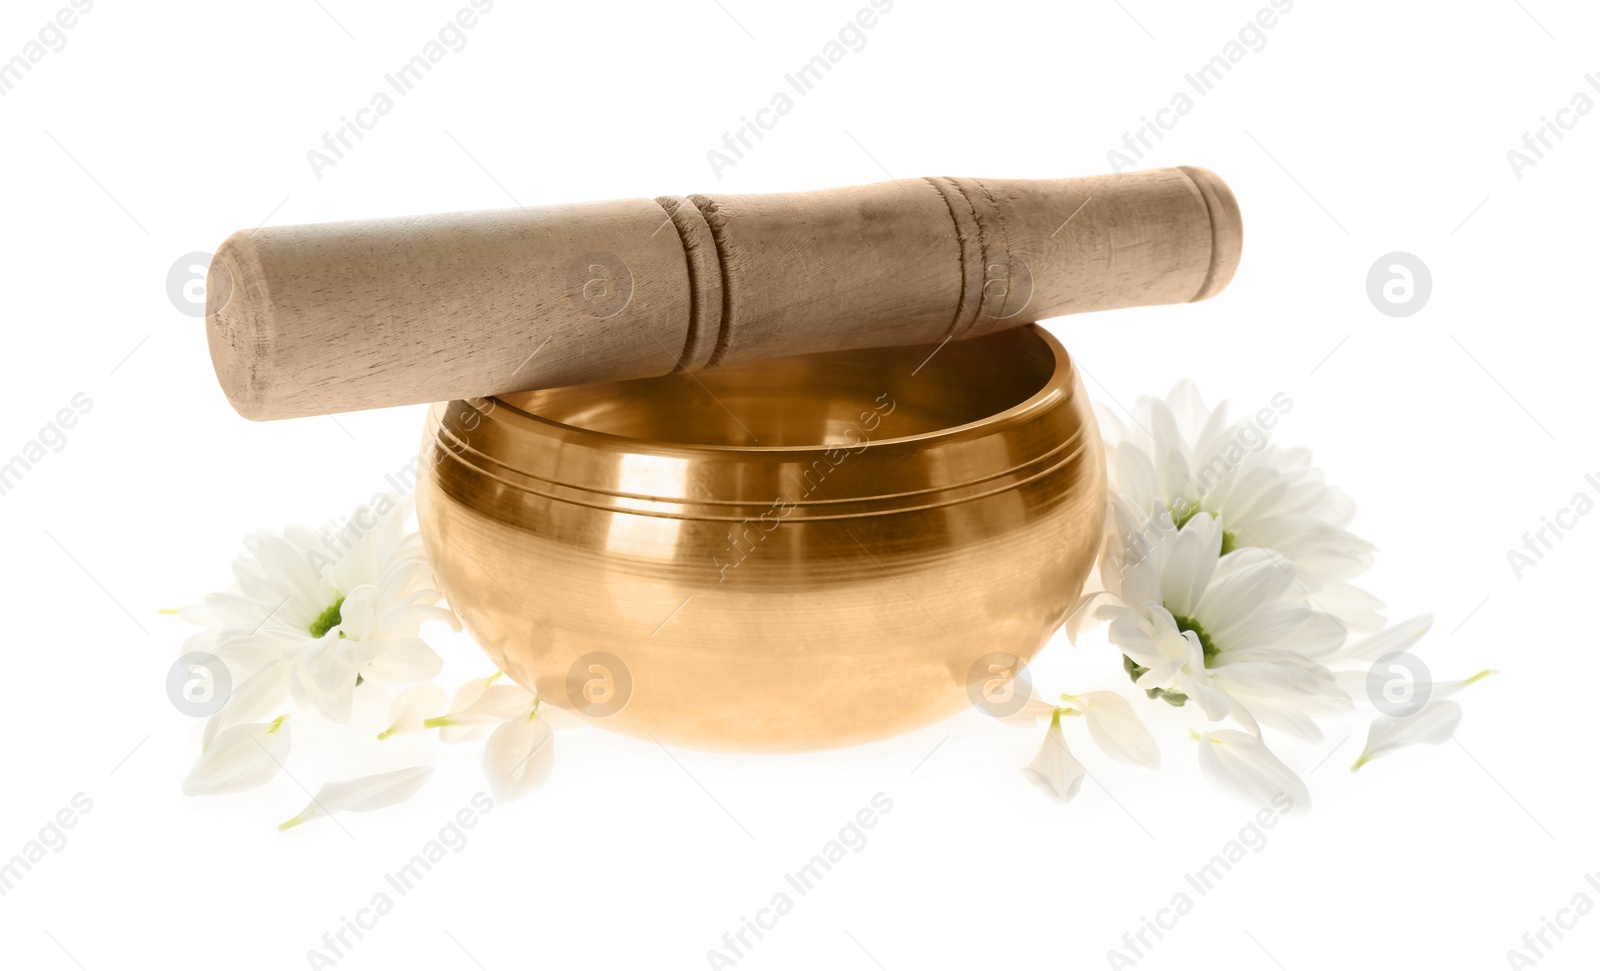 Photo of Golden singing bowl with mallet and flowers on white background. Sound healing